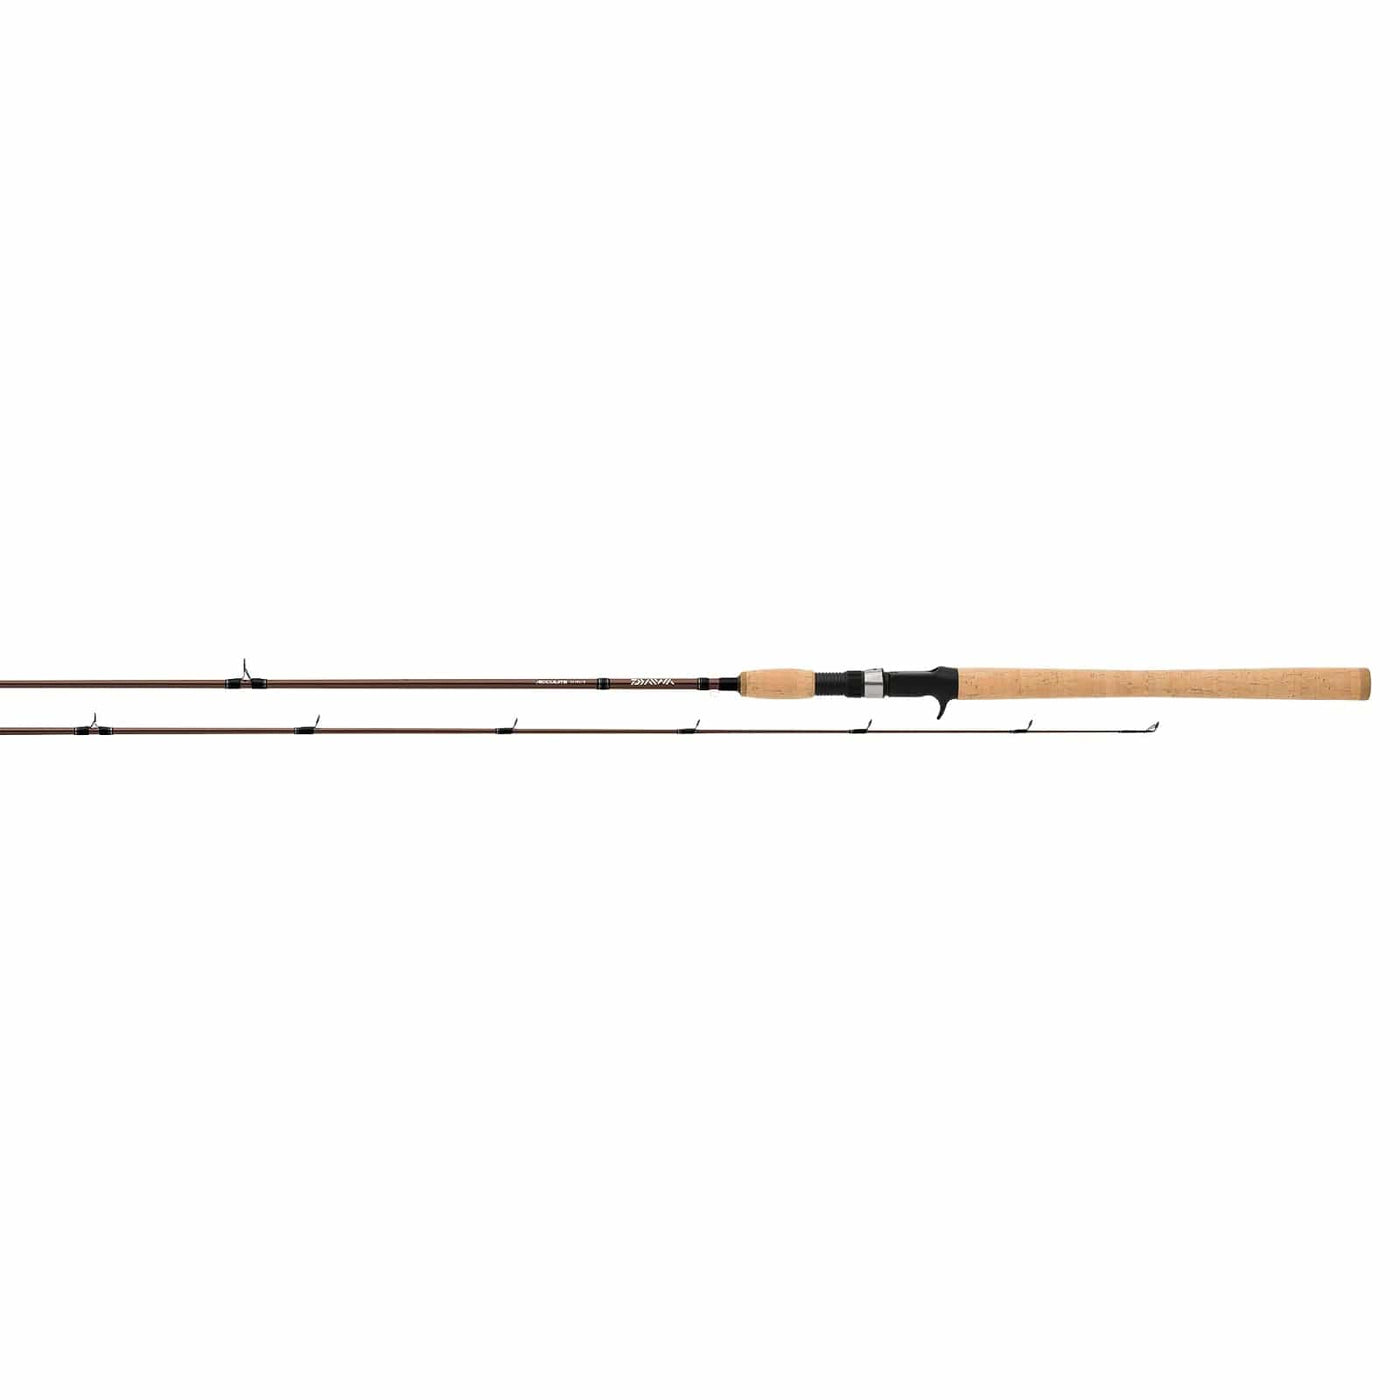 Daiwa Daiwa Acculite Spinning Rod ACLT962LSS 9 ft 6 in 2 pc Fishing